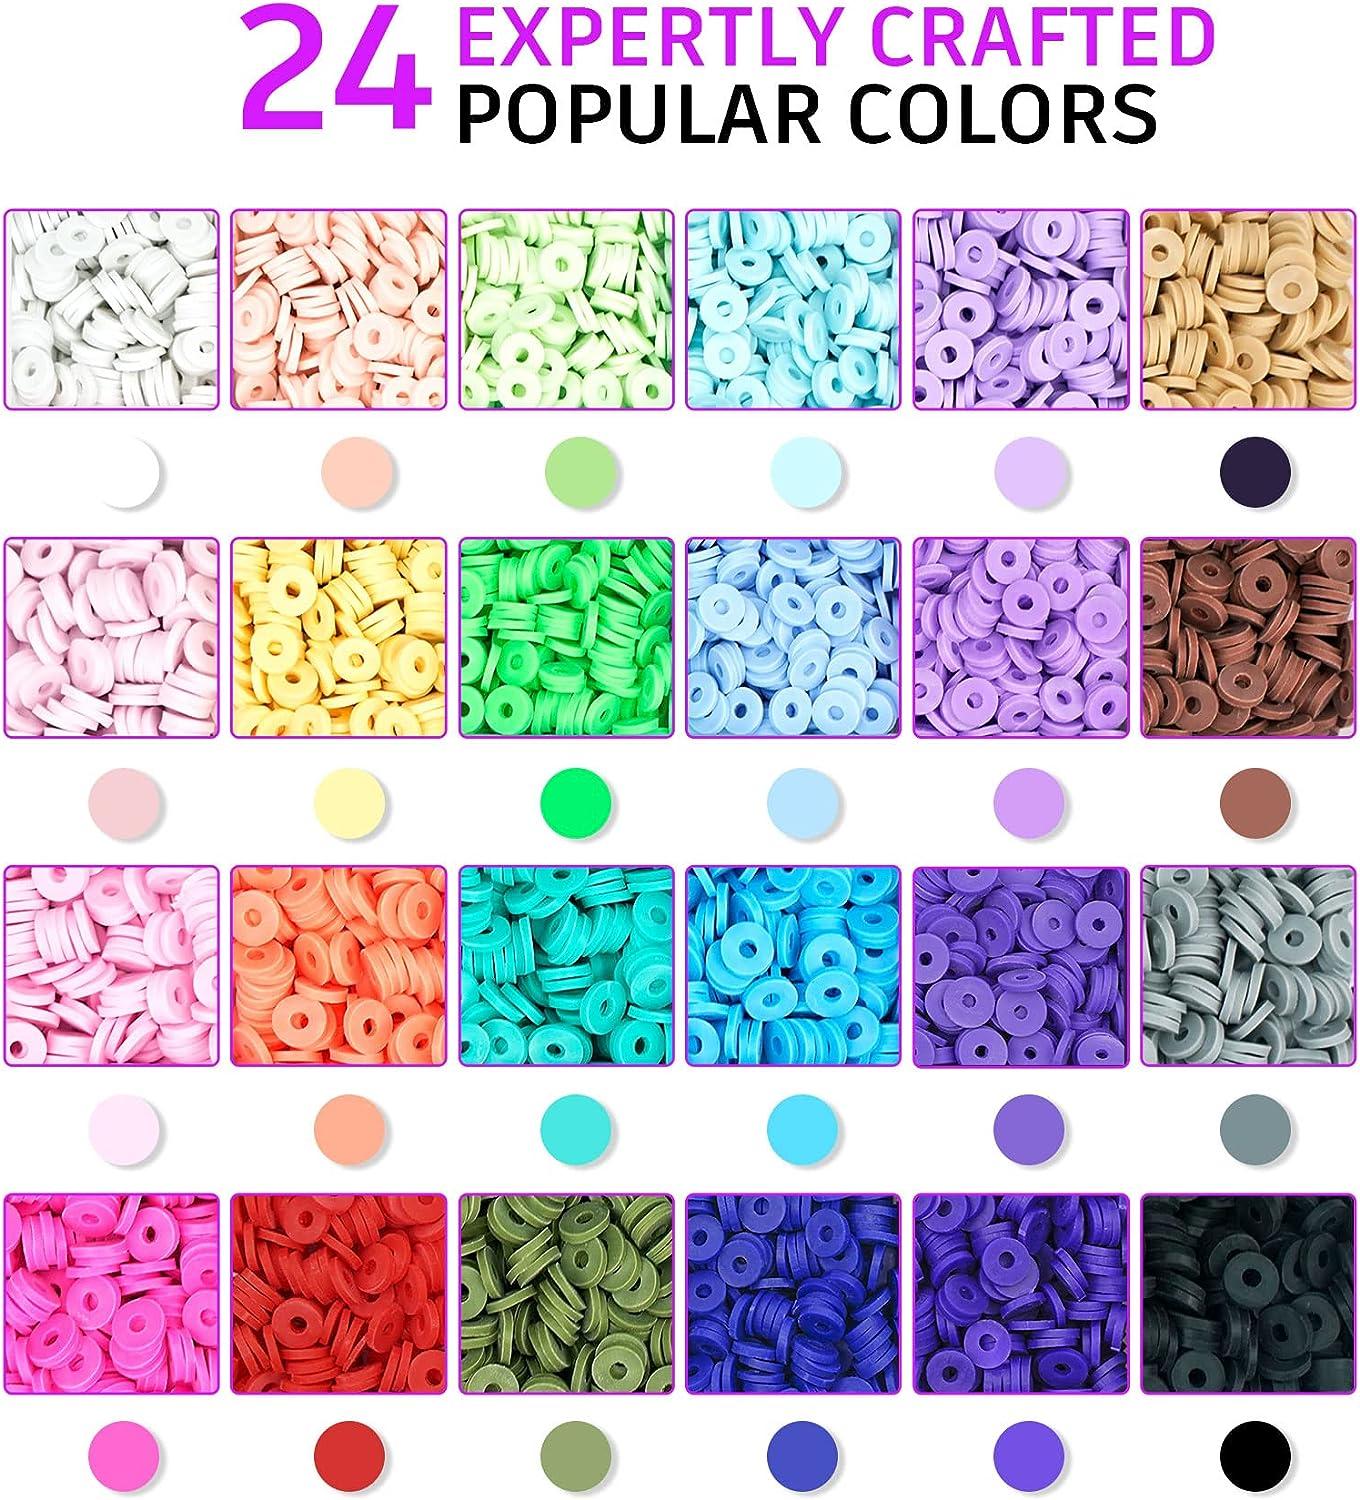 Gionlion 6000 Clay Beads Bracelet Making Kit, 24 Colors Flat Preppy Beads  for Friendship Bracelets, Polymer Clay Beads with Charms for Jewelry  Making